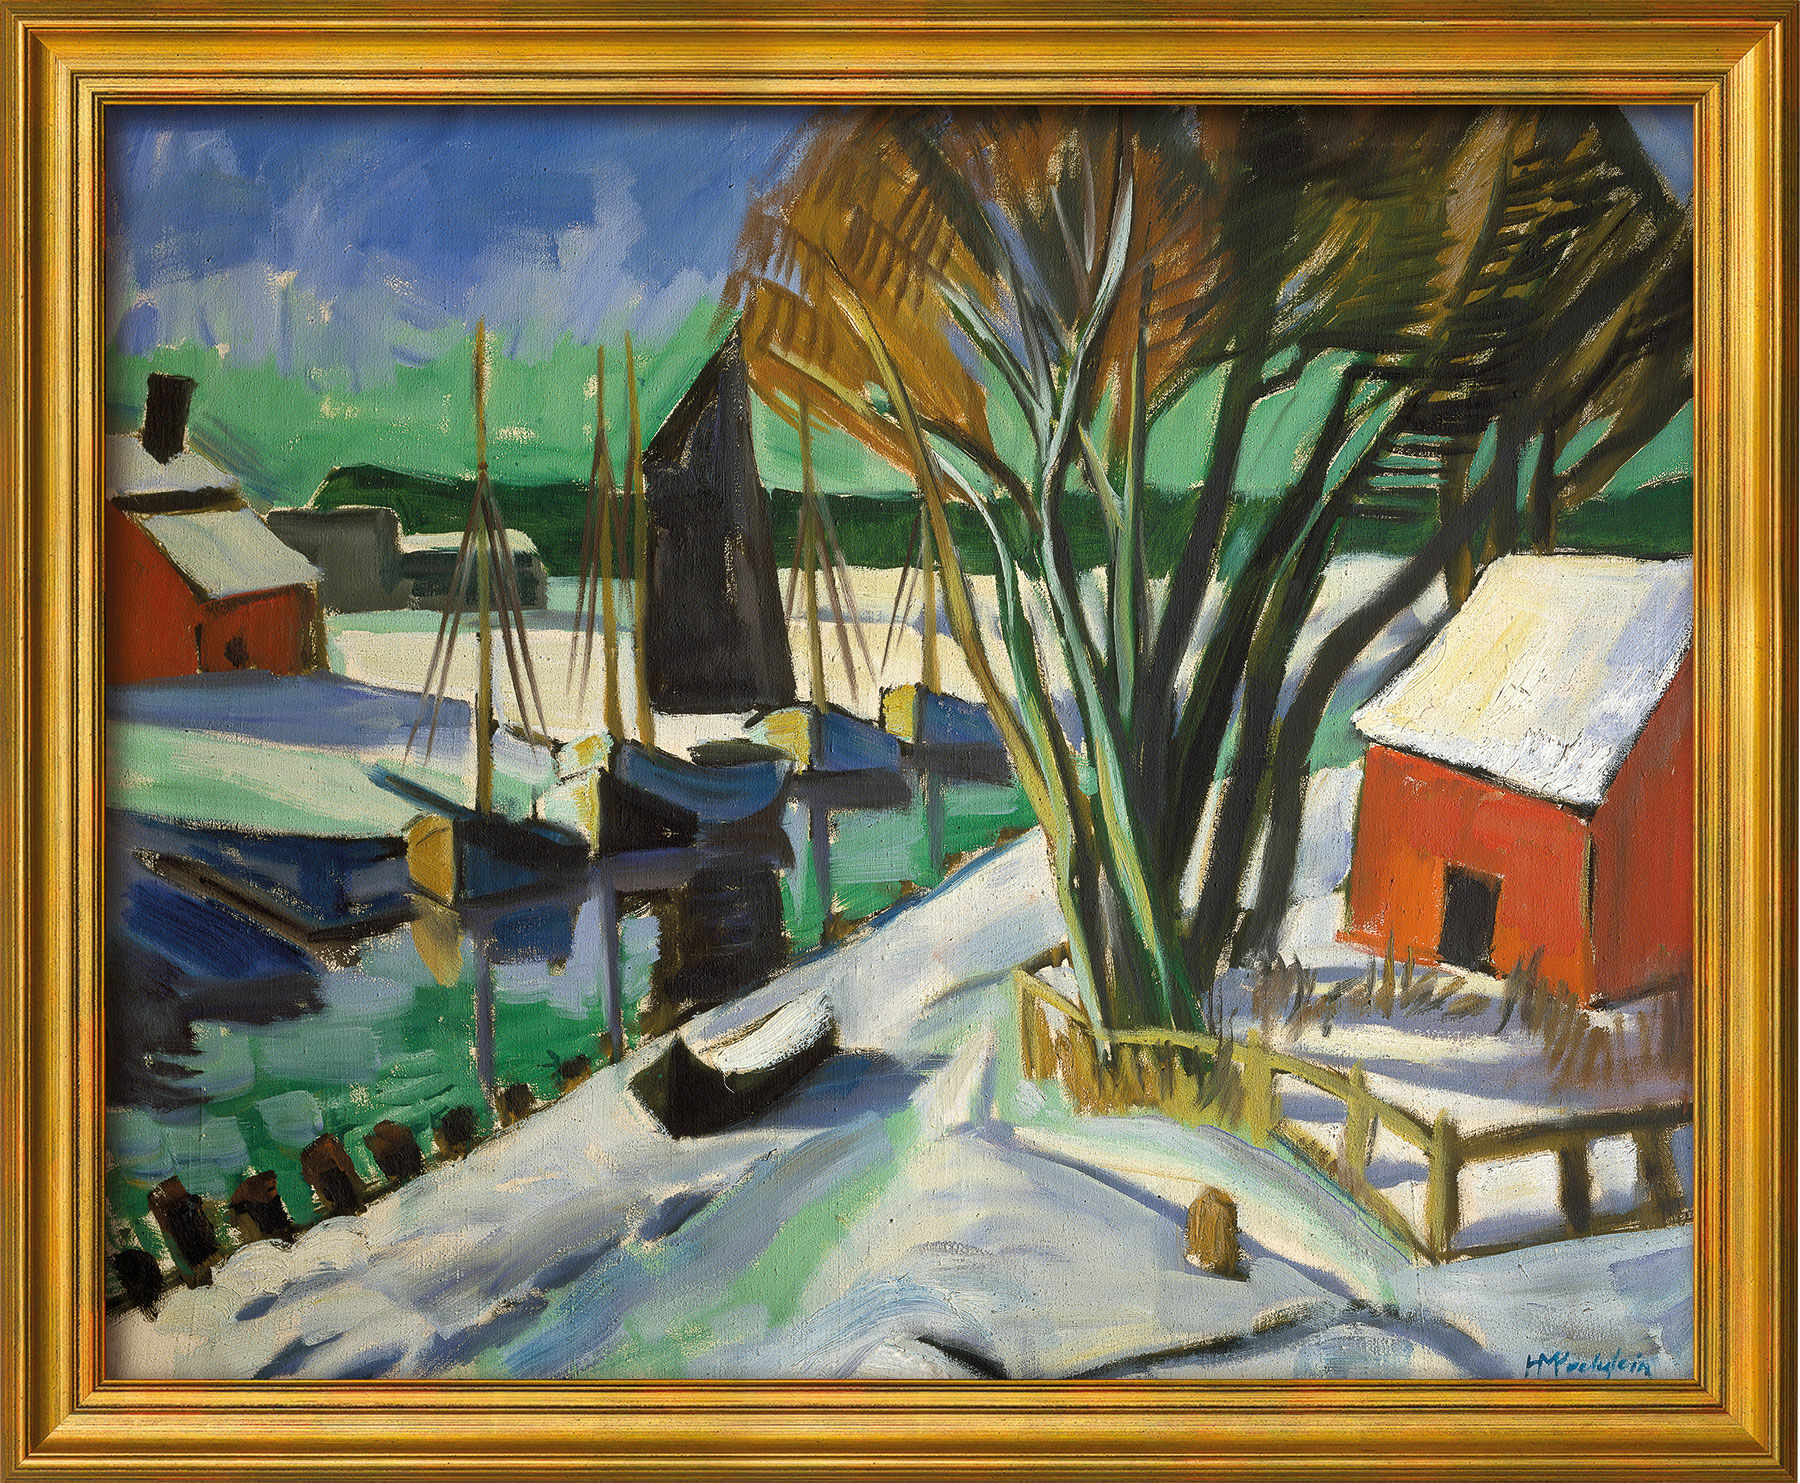 Picture "By the River in Winter (Leba)" (1922), golden framed version by Max Pechstein